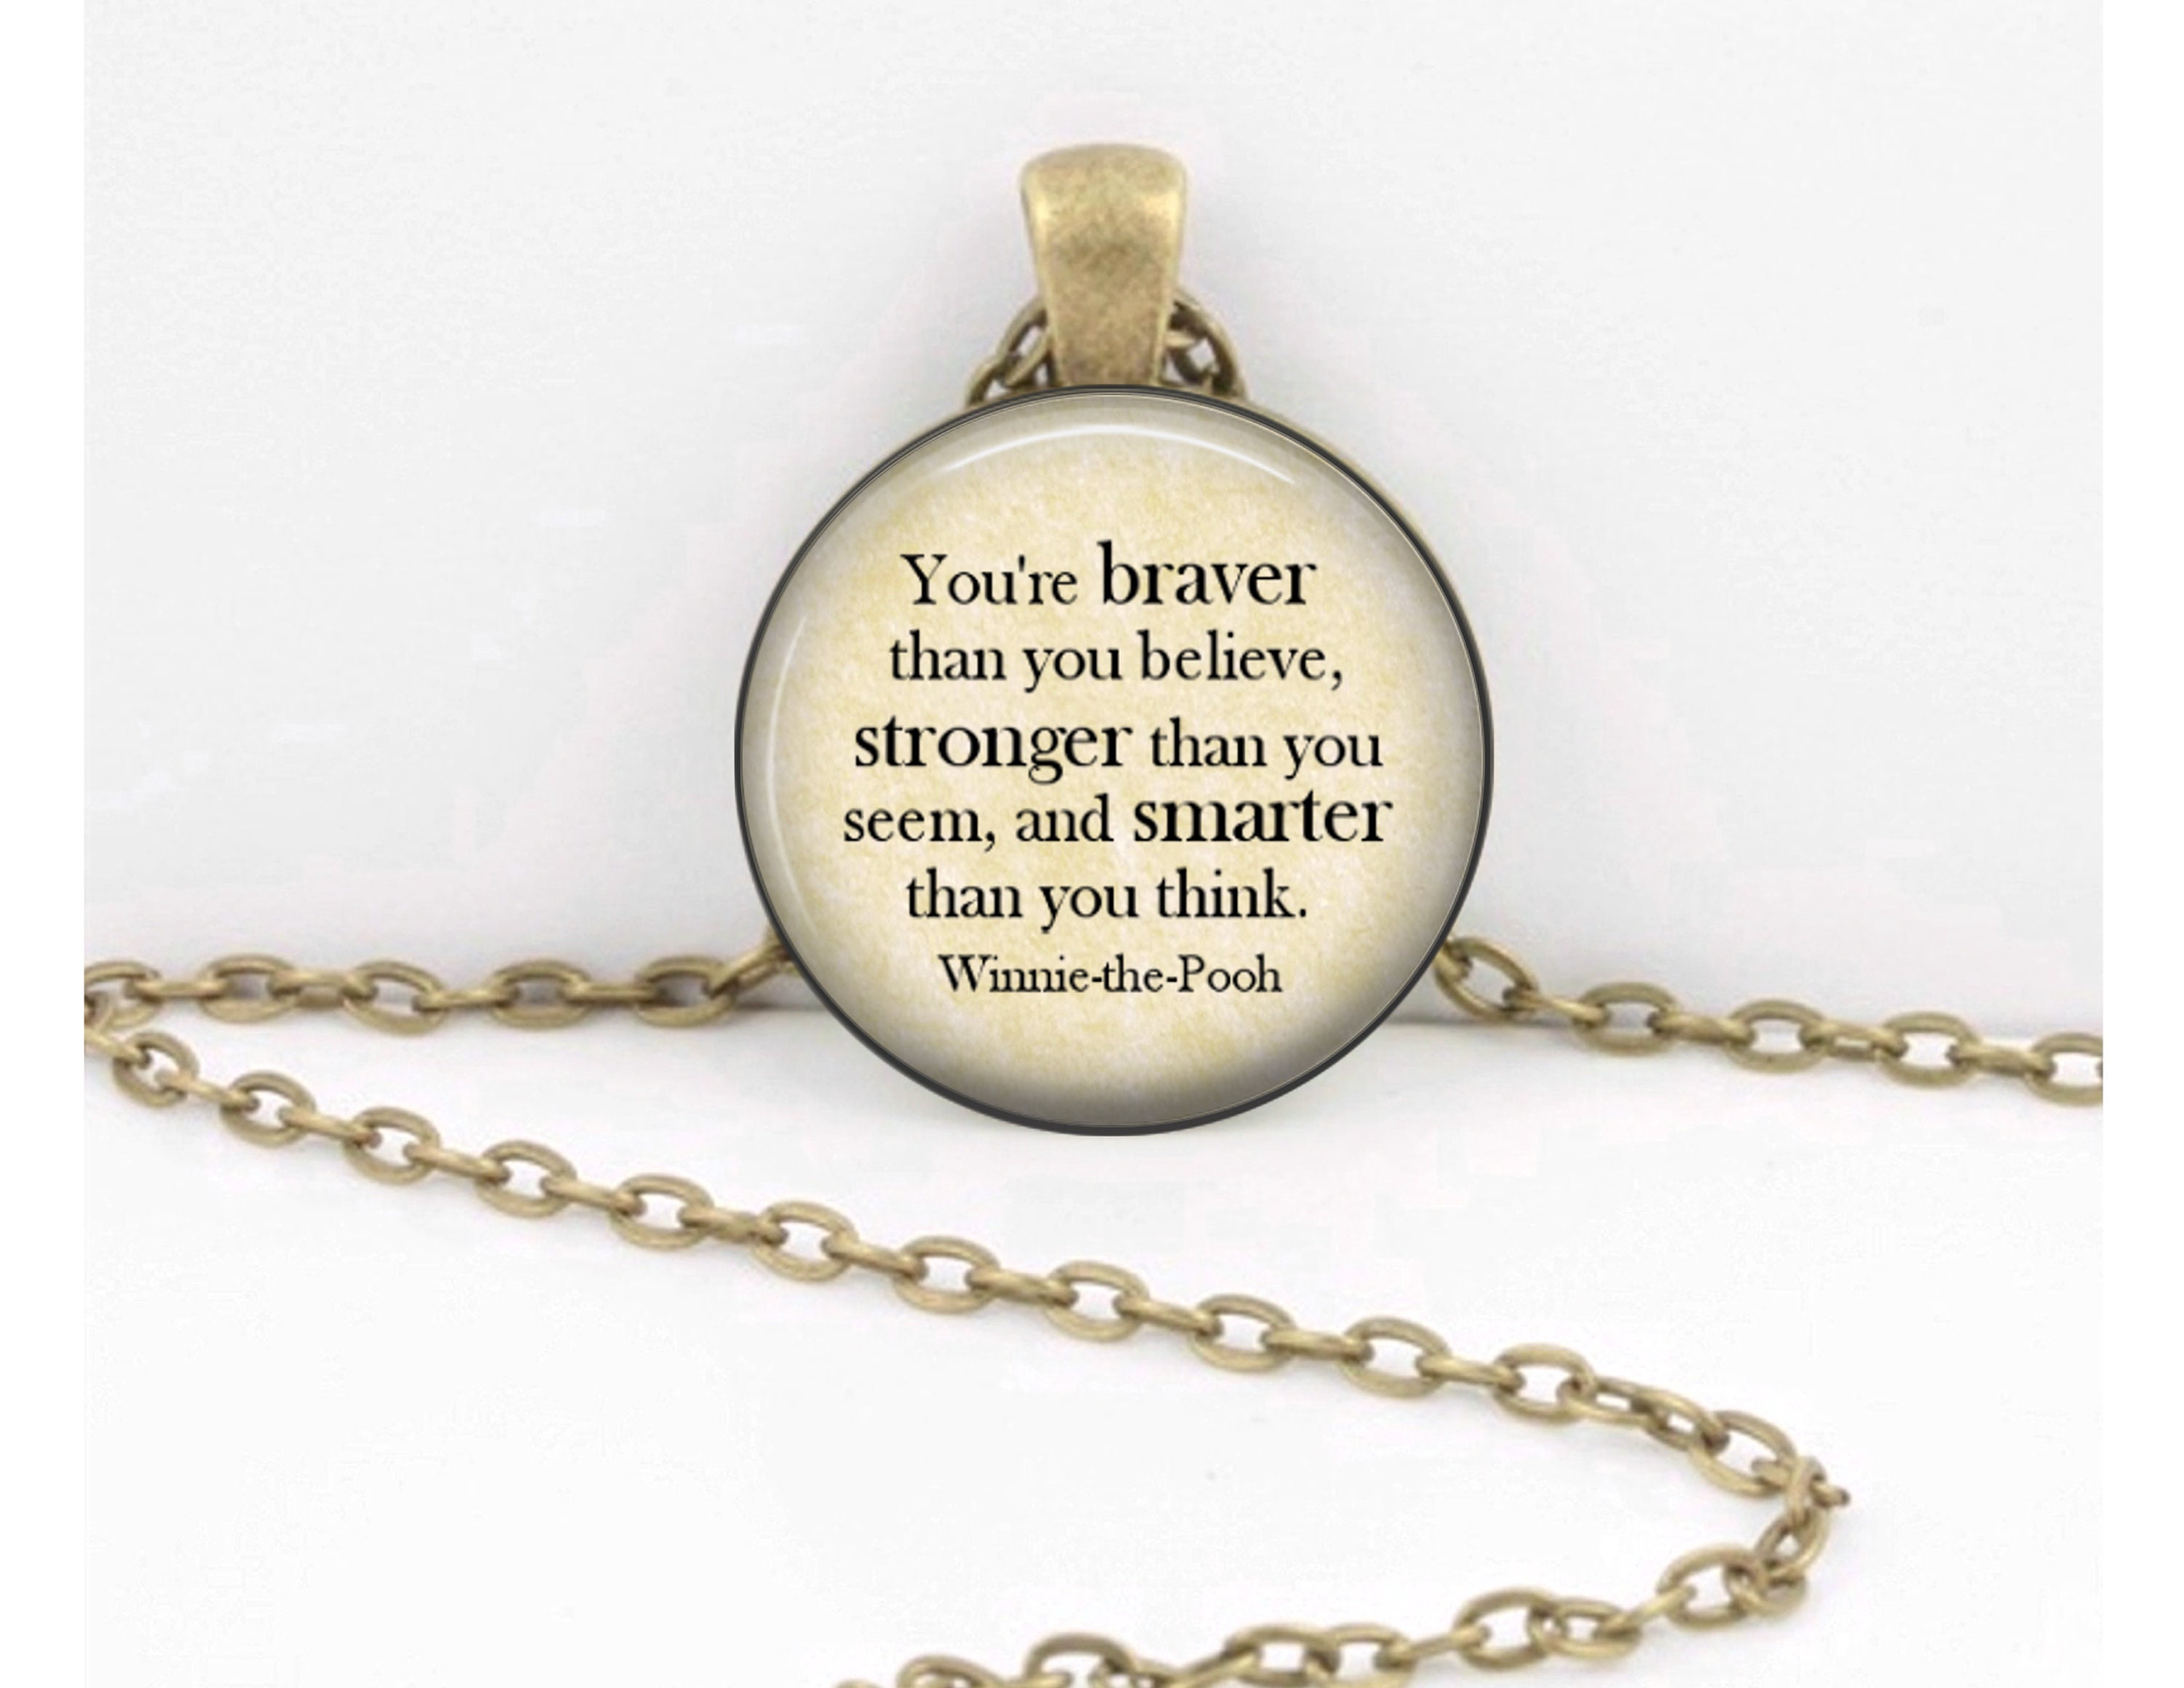 Winnie the Pooh Braver Stronger Smarter Pooh Bear Pendant Necklace Inspiration Jewelry or Key Ring